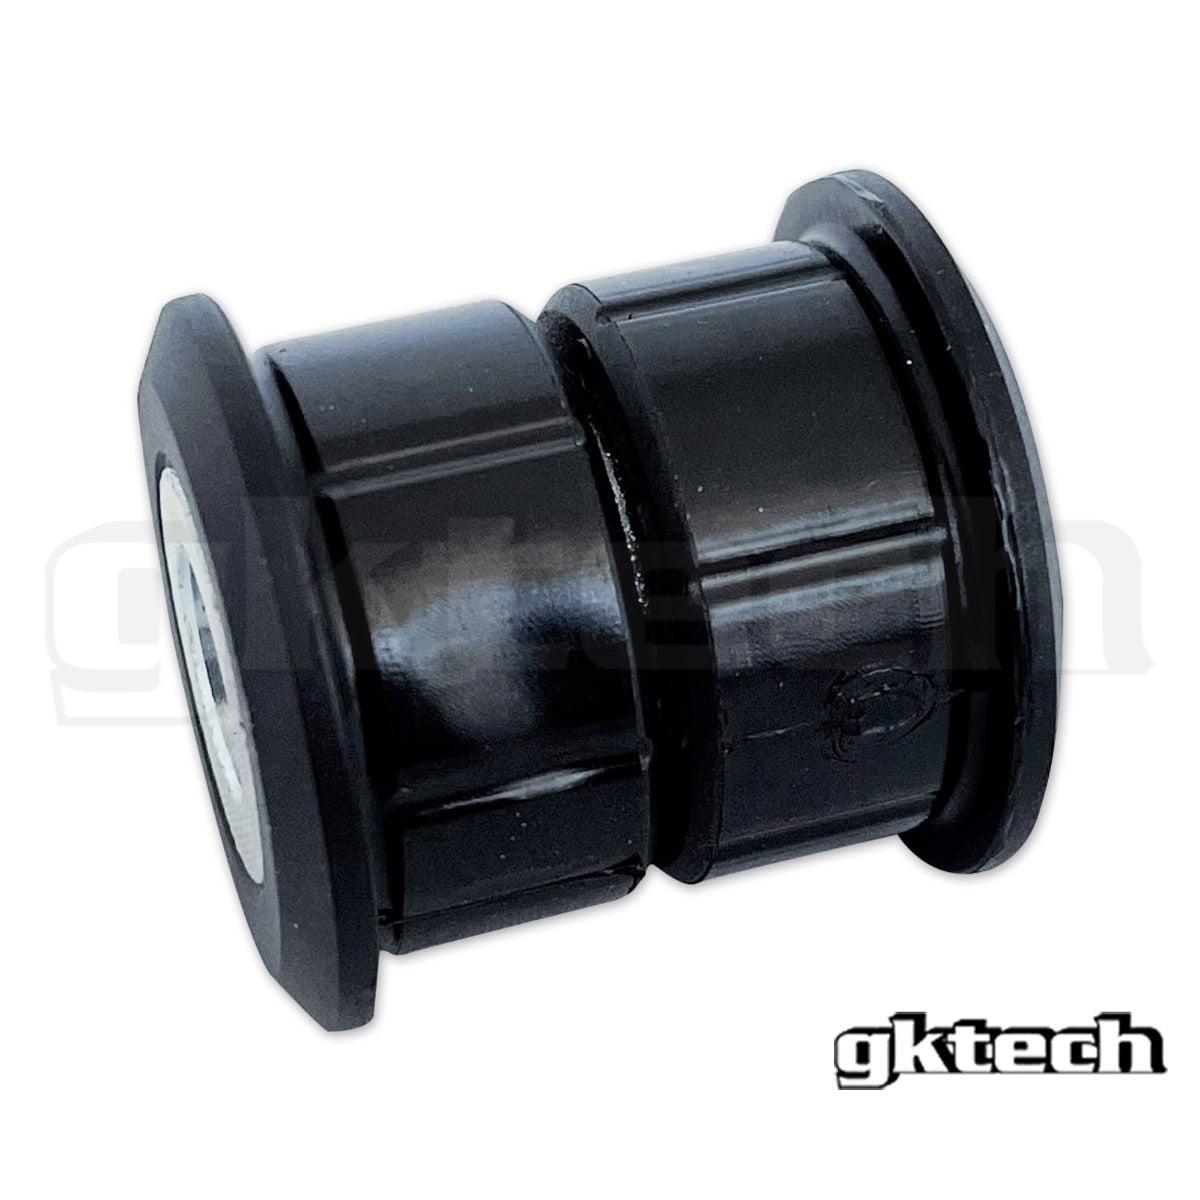 Polyurethane S/R/Z Chassis Rear Knuckle Bushes (pair)